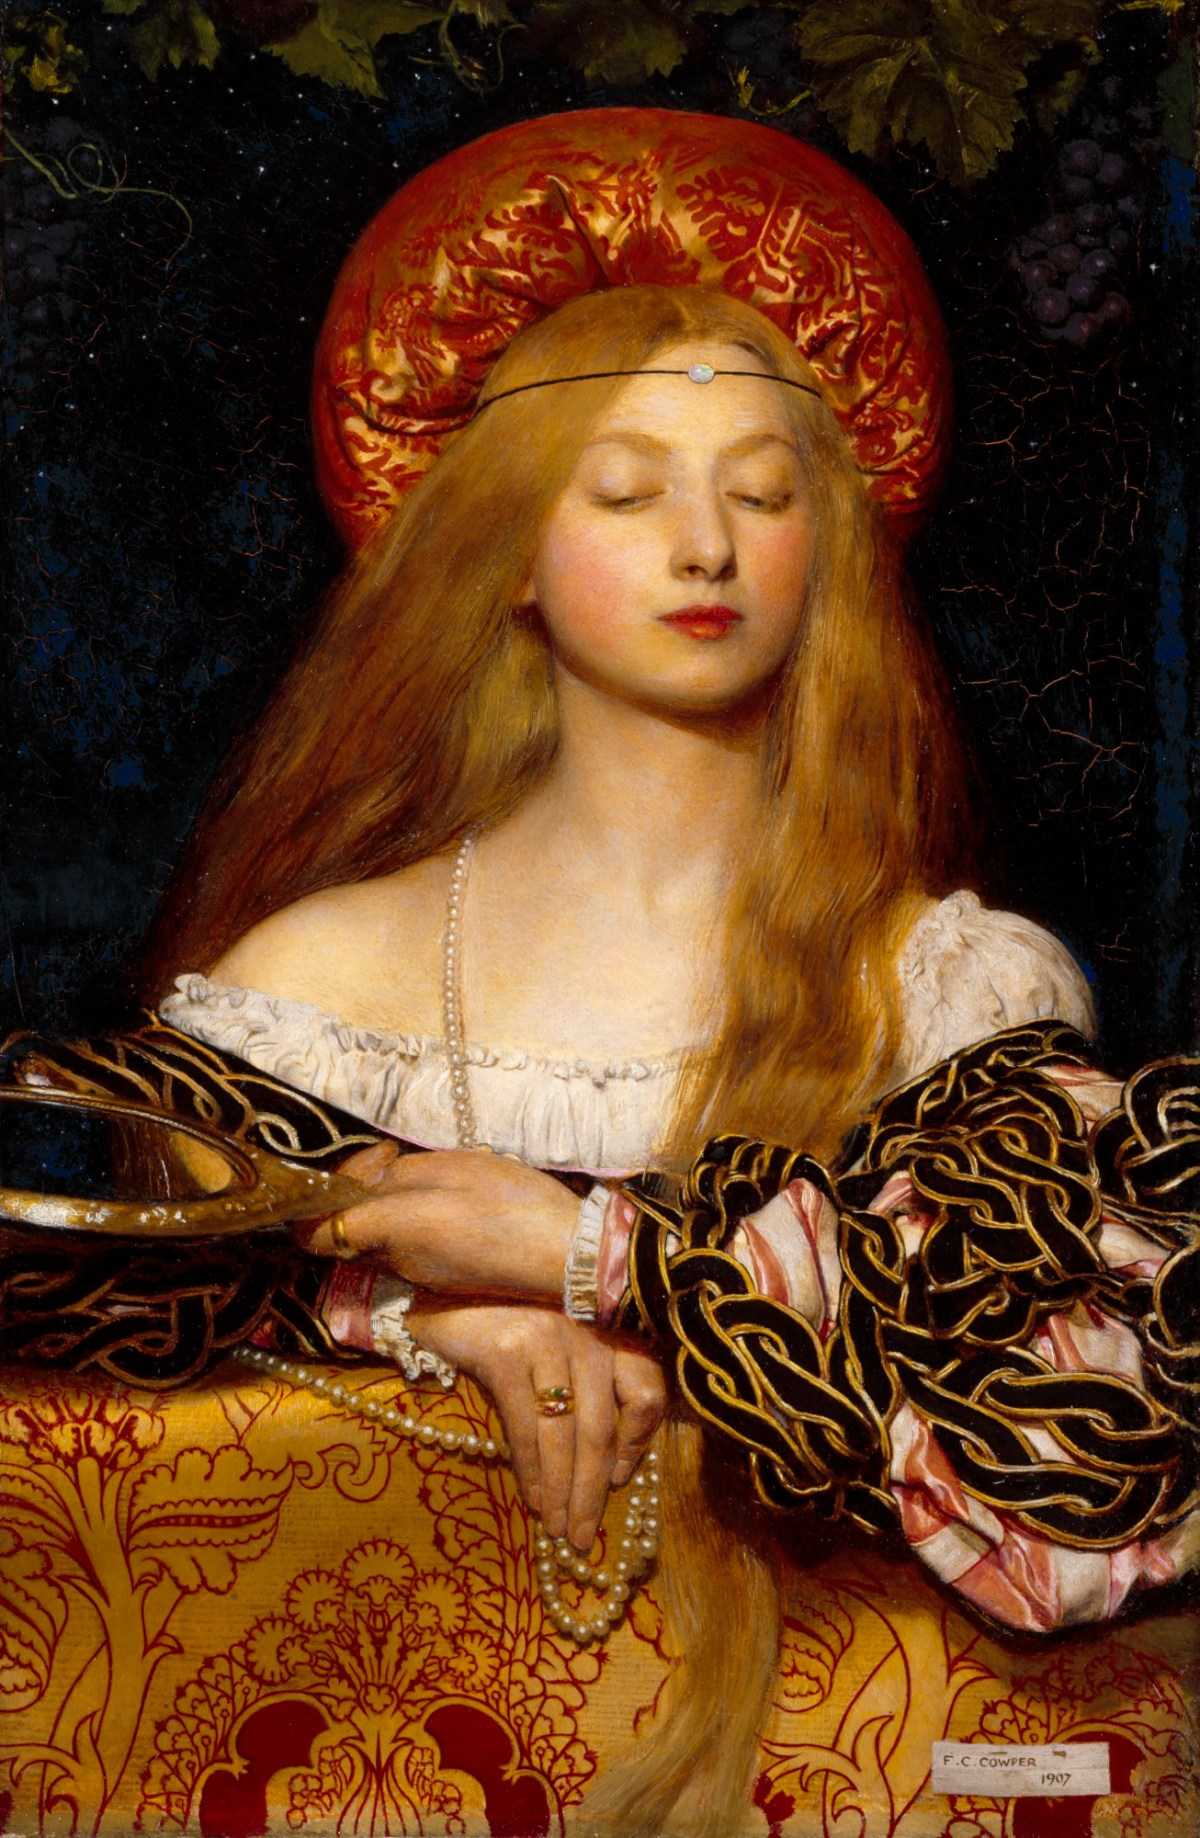 Find out more about Frank Cadogan Cowper - Vanity